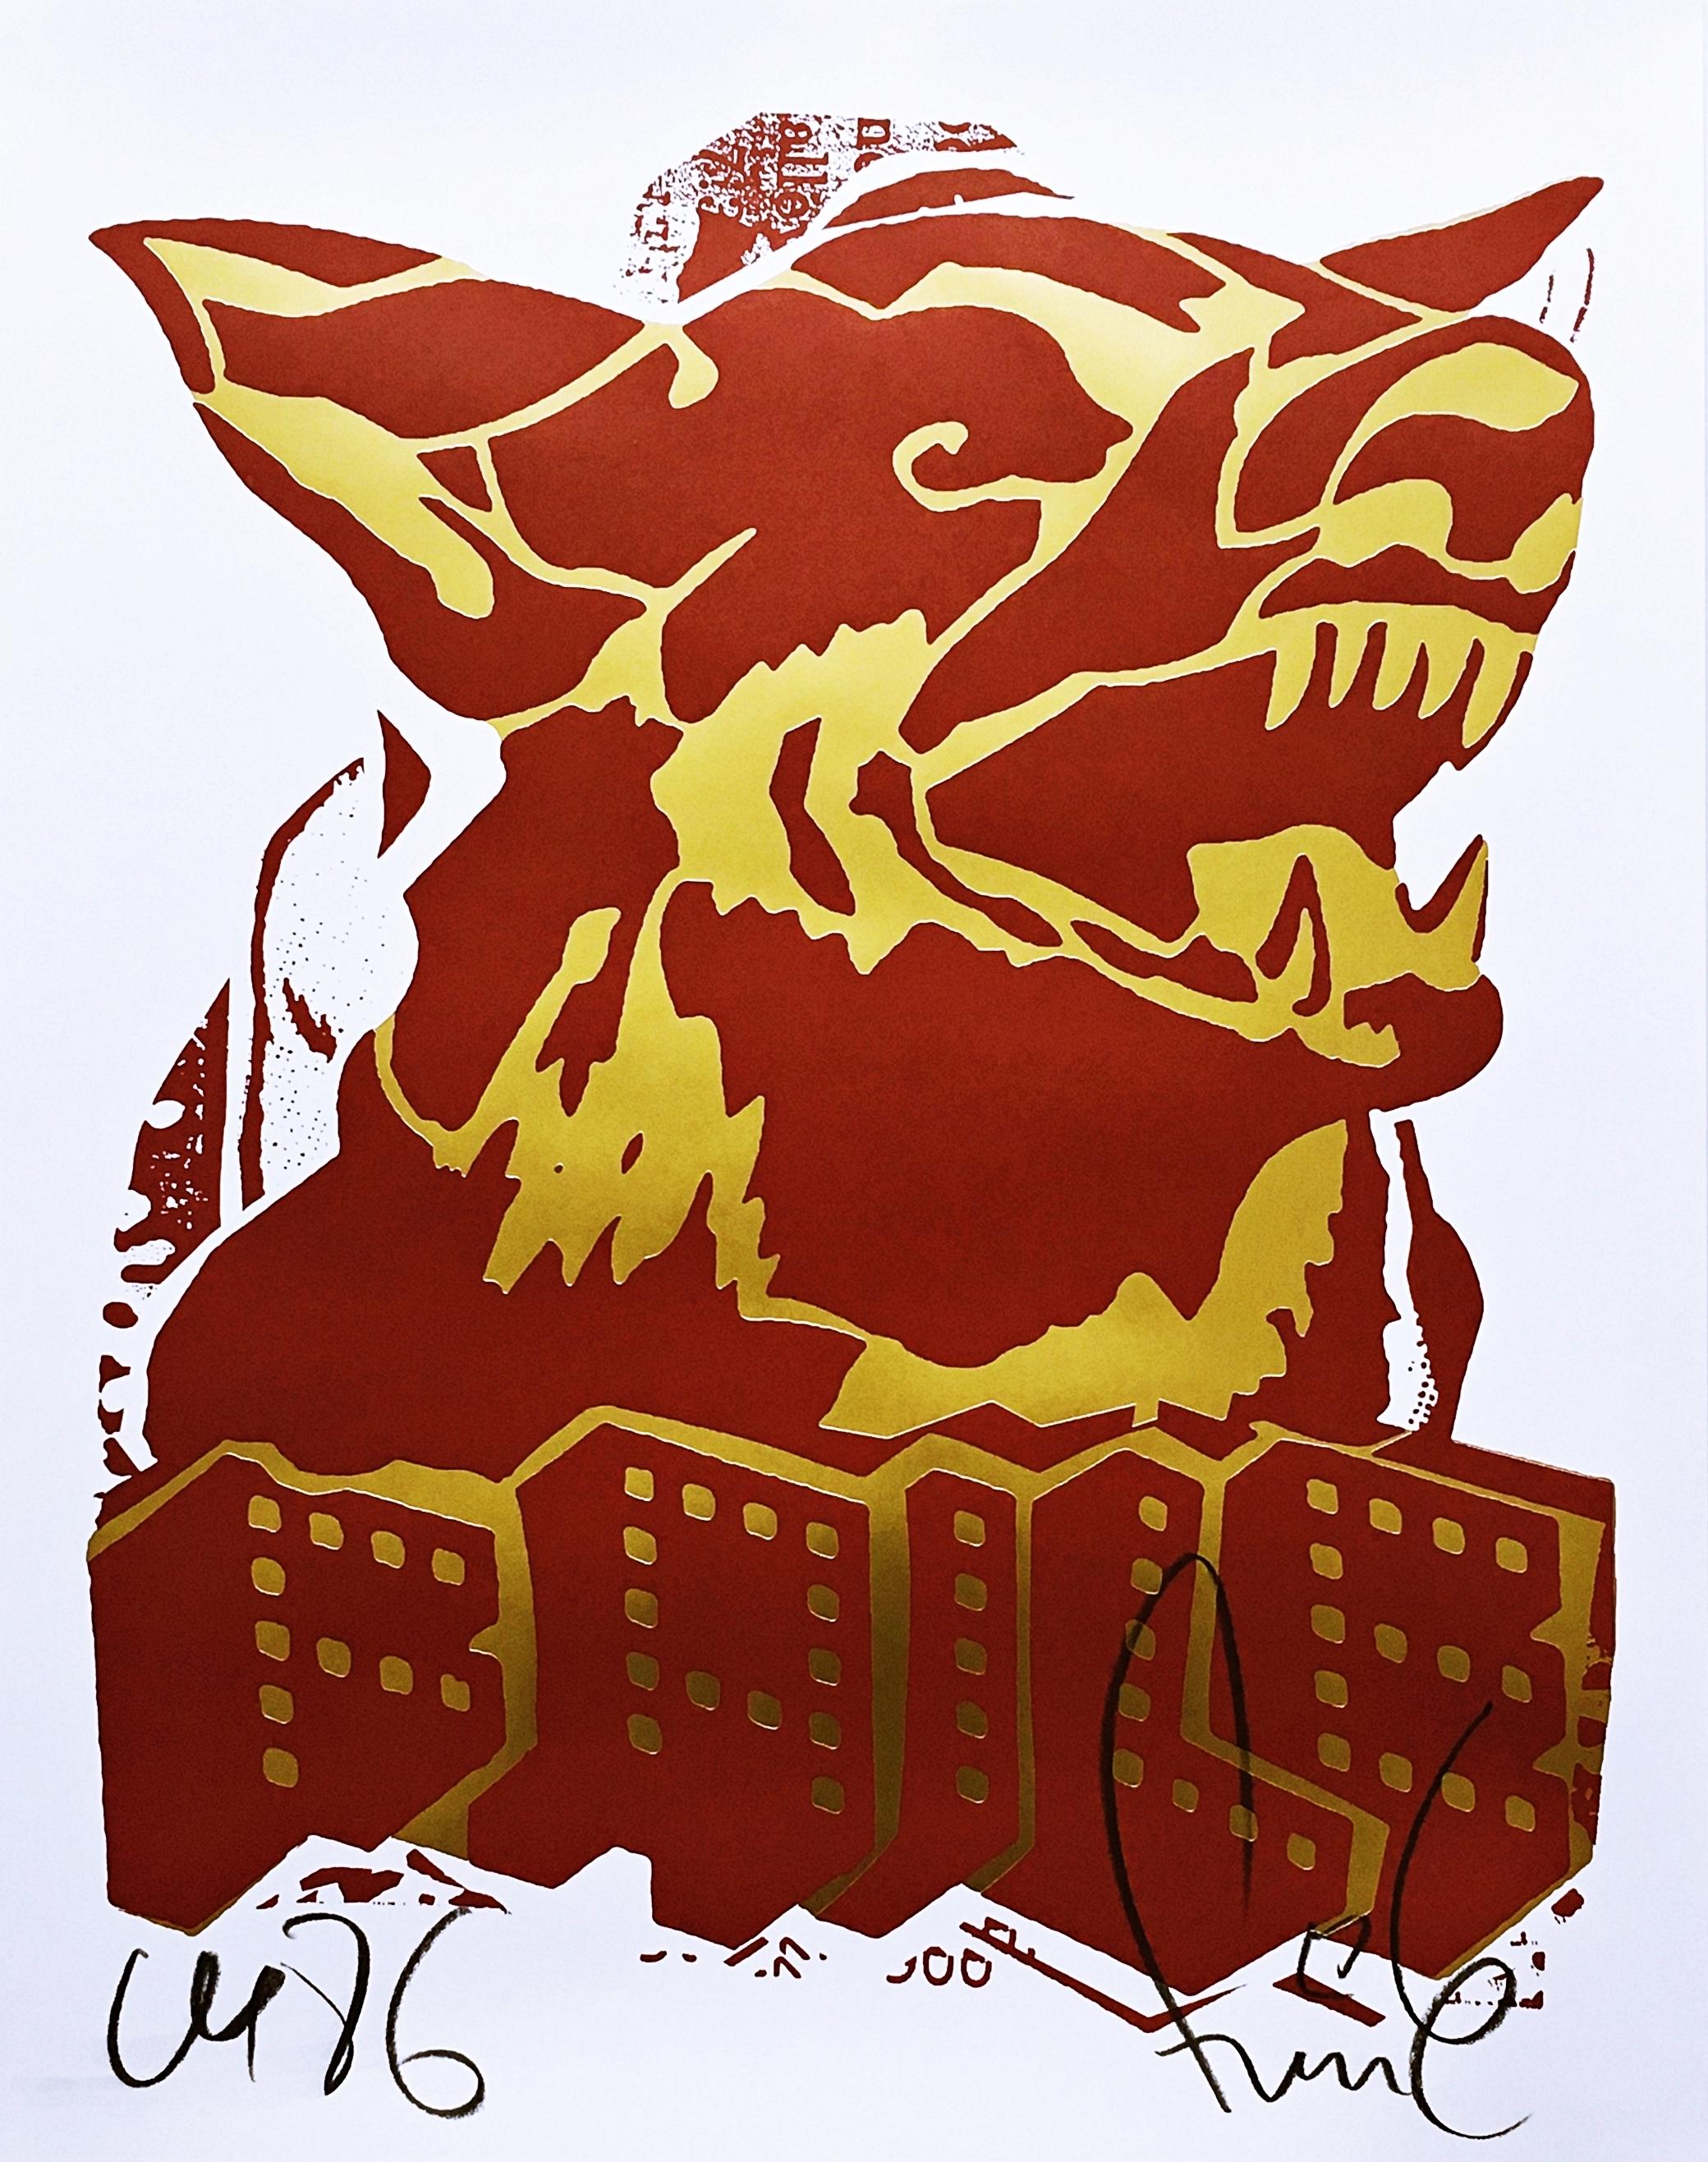 Faile Abstract Print - Red Dog (limited edition print with gold foil) by famous Street Art Pop Artists 